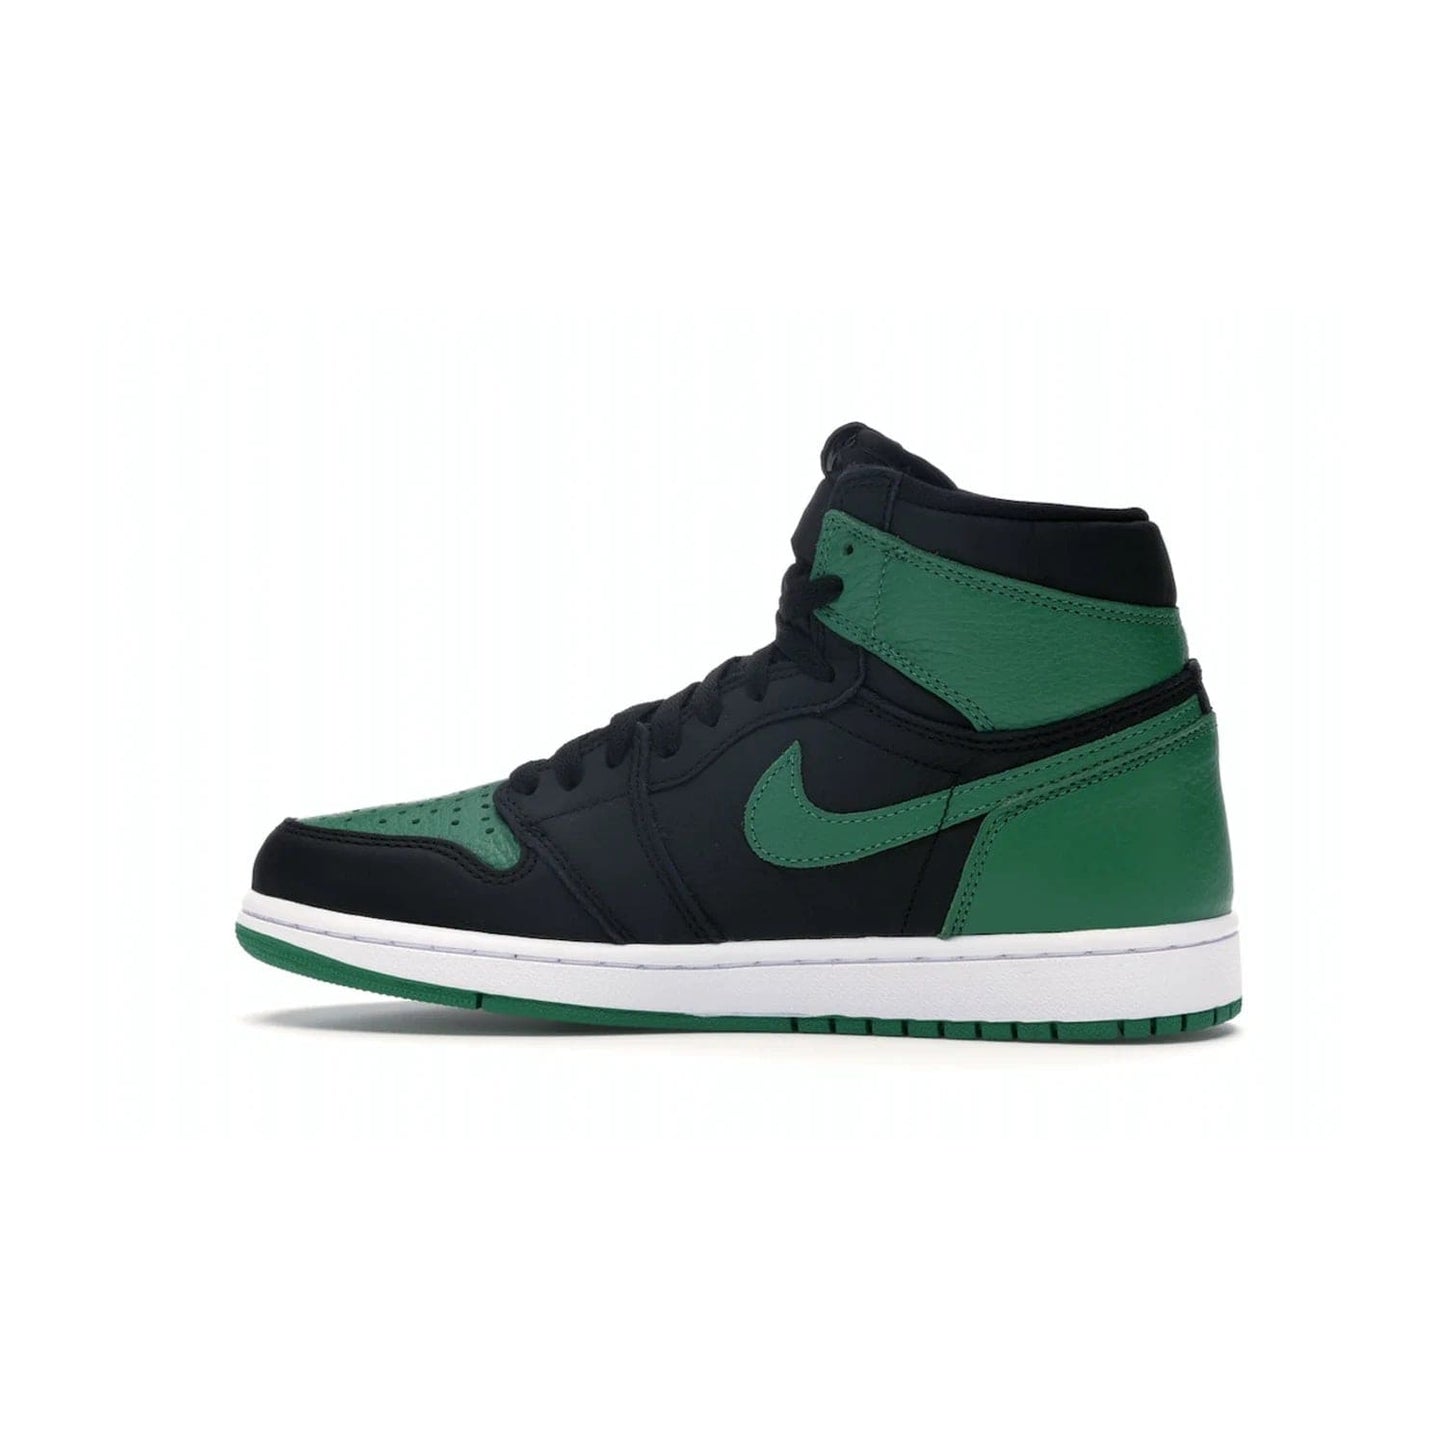 Jordan 1 Retro High Pine Green Black - Image 20 - Only at www.BallersClubKickz.com - Step into fresh style with the Jordan 1 Retro High Pine Green Black. Combining a black tumbled leather upper with green leather overlays, this sneaker features a Gym Red embroidered tongue tag, sail midsole, and pine green outsole for iconic style with a unique twist.